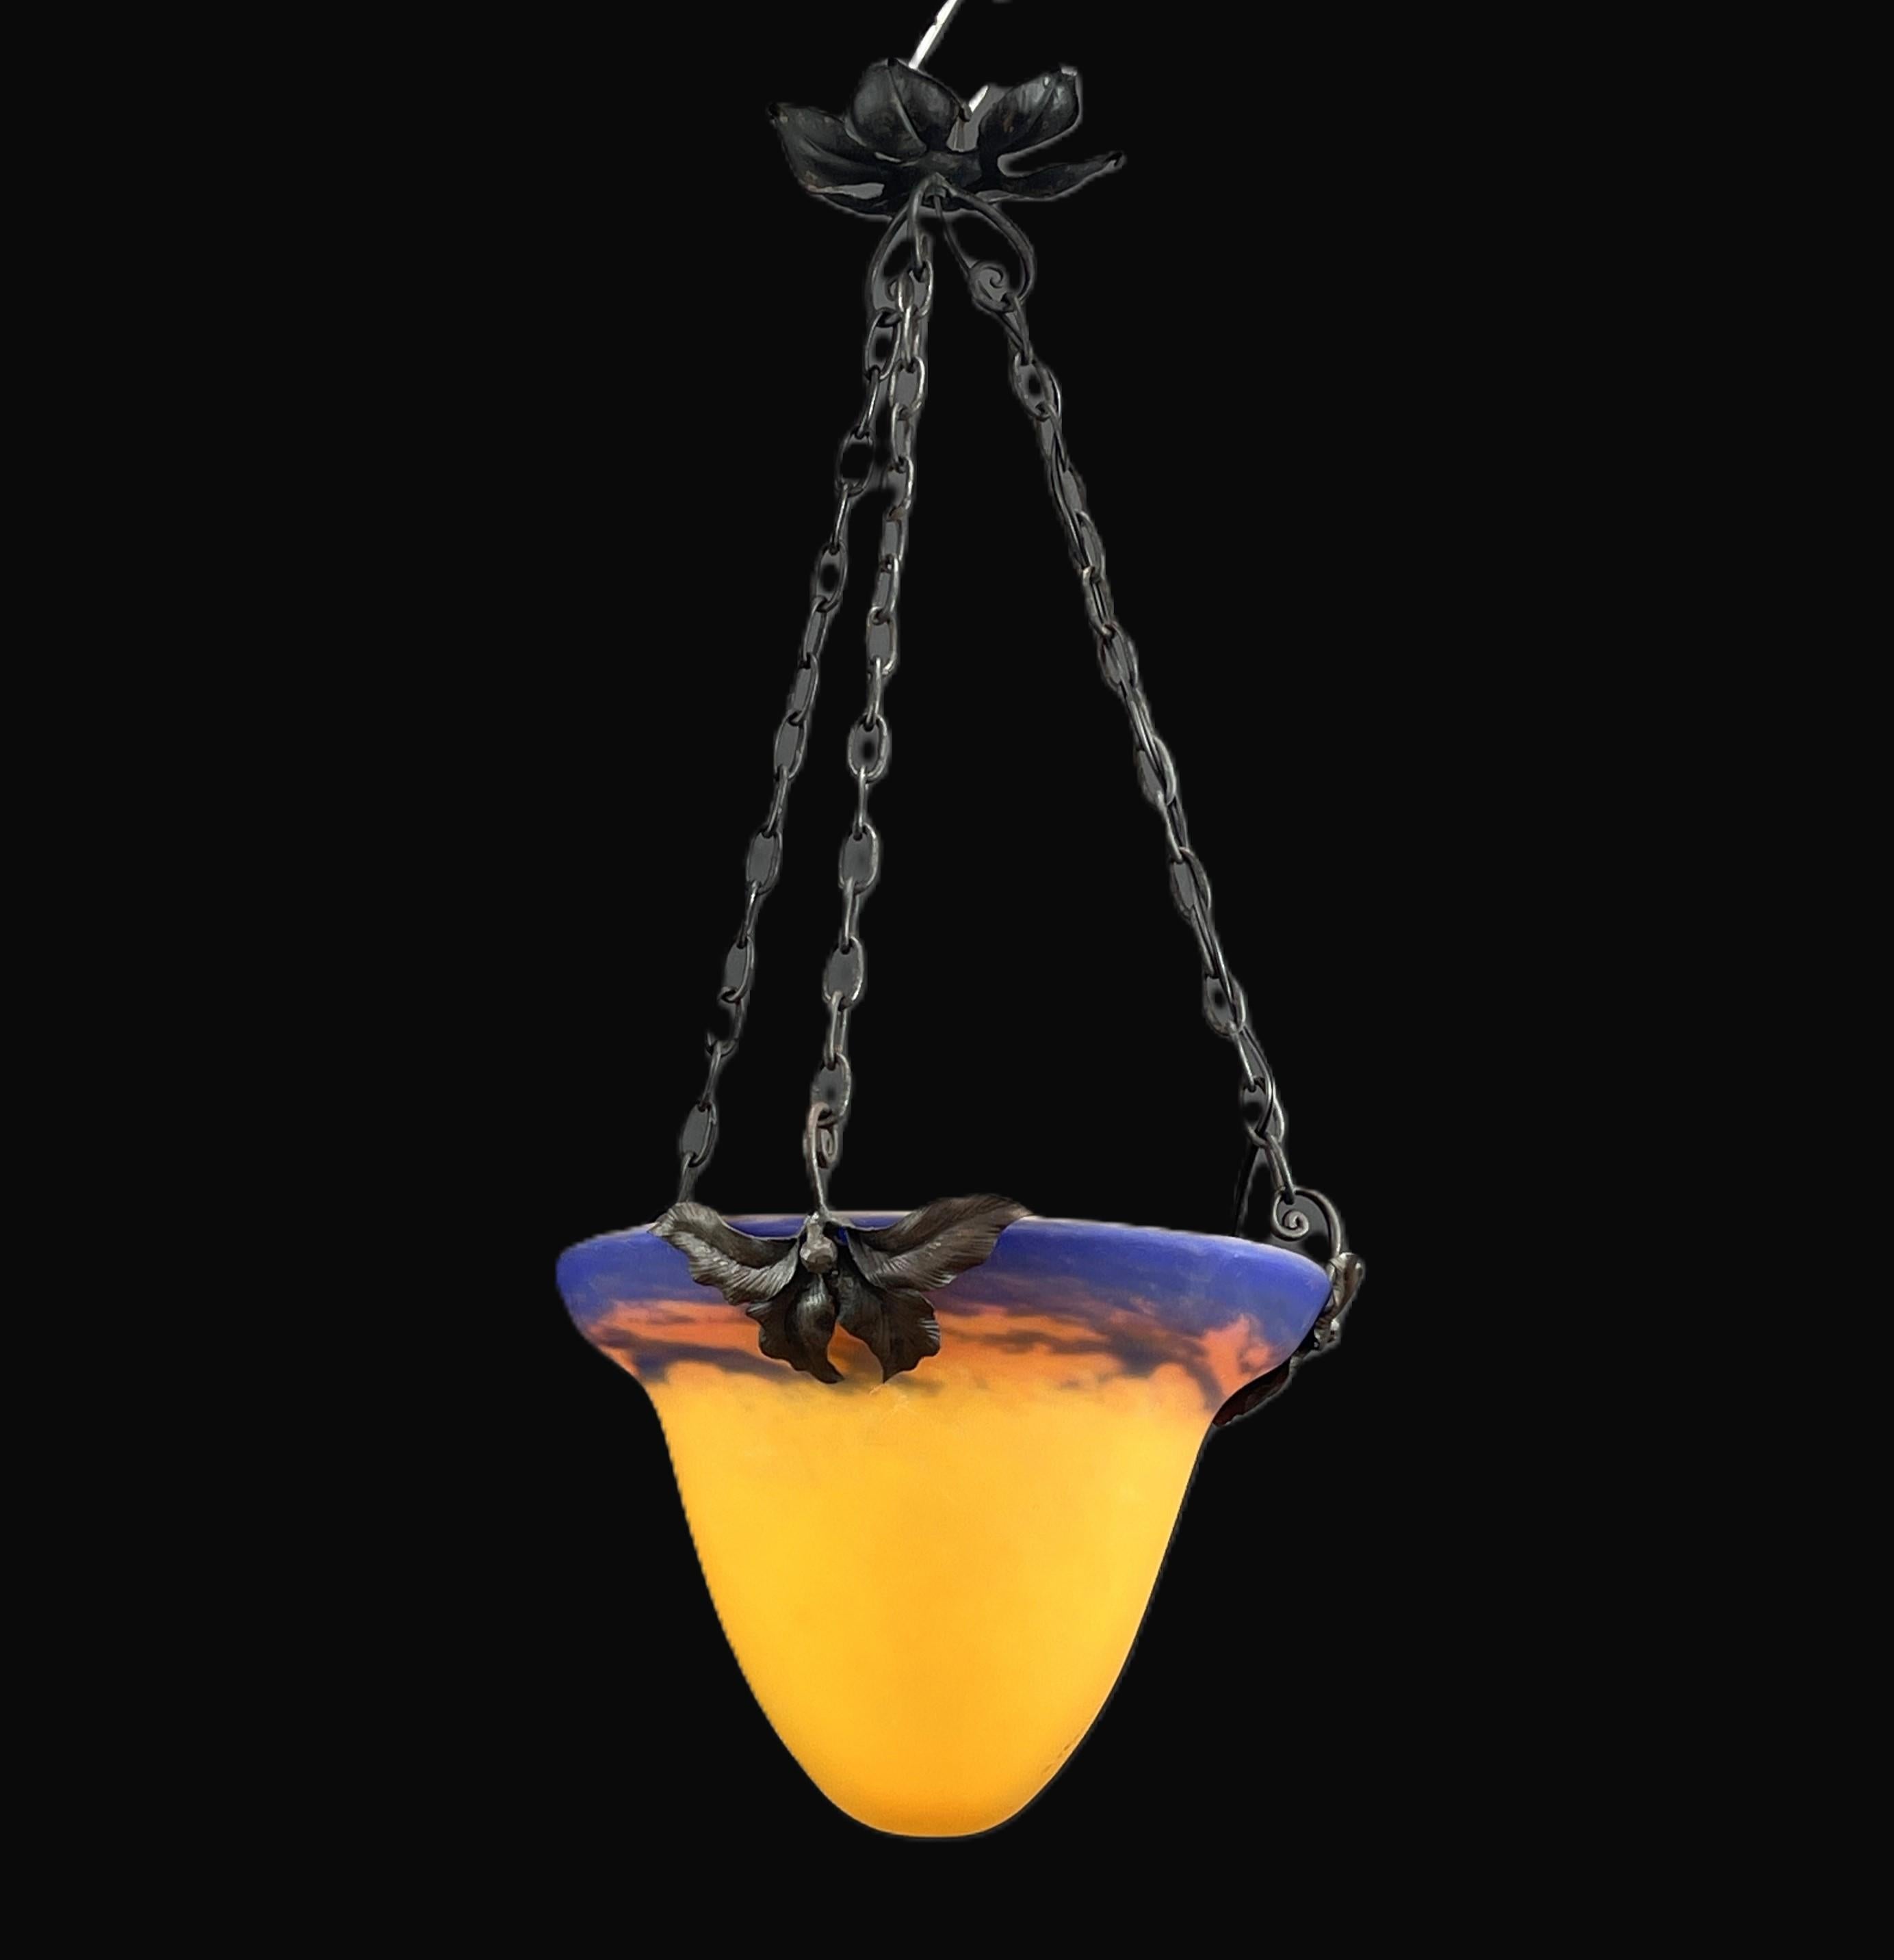 art deco ceiling lamp by  Muller Frères Lunéville

The ART DECO ceiling lamp is a remarkable example of the craftsmanship and style of the early 20th century.
The signature 